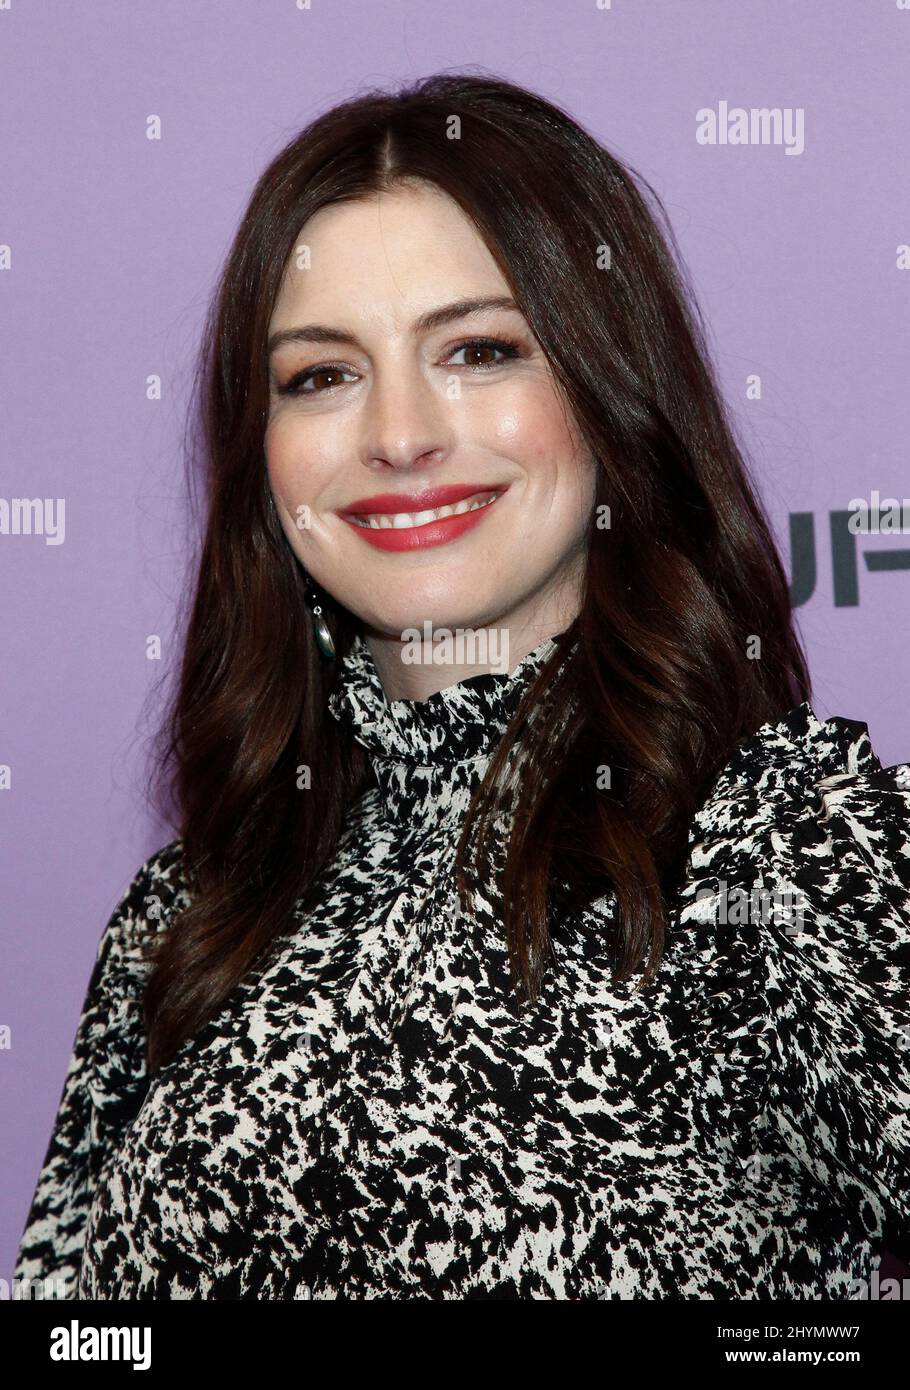 Anne Hathaway at the premiere of 'The Last Thing He Wanted' during the 2020 Sundance Film Festival held at the Eccles Theatre on January 27, 2020 in Park City, UT. Stock Photo